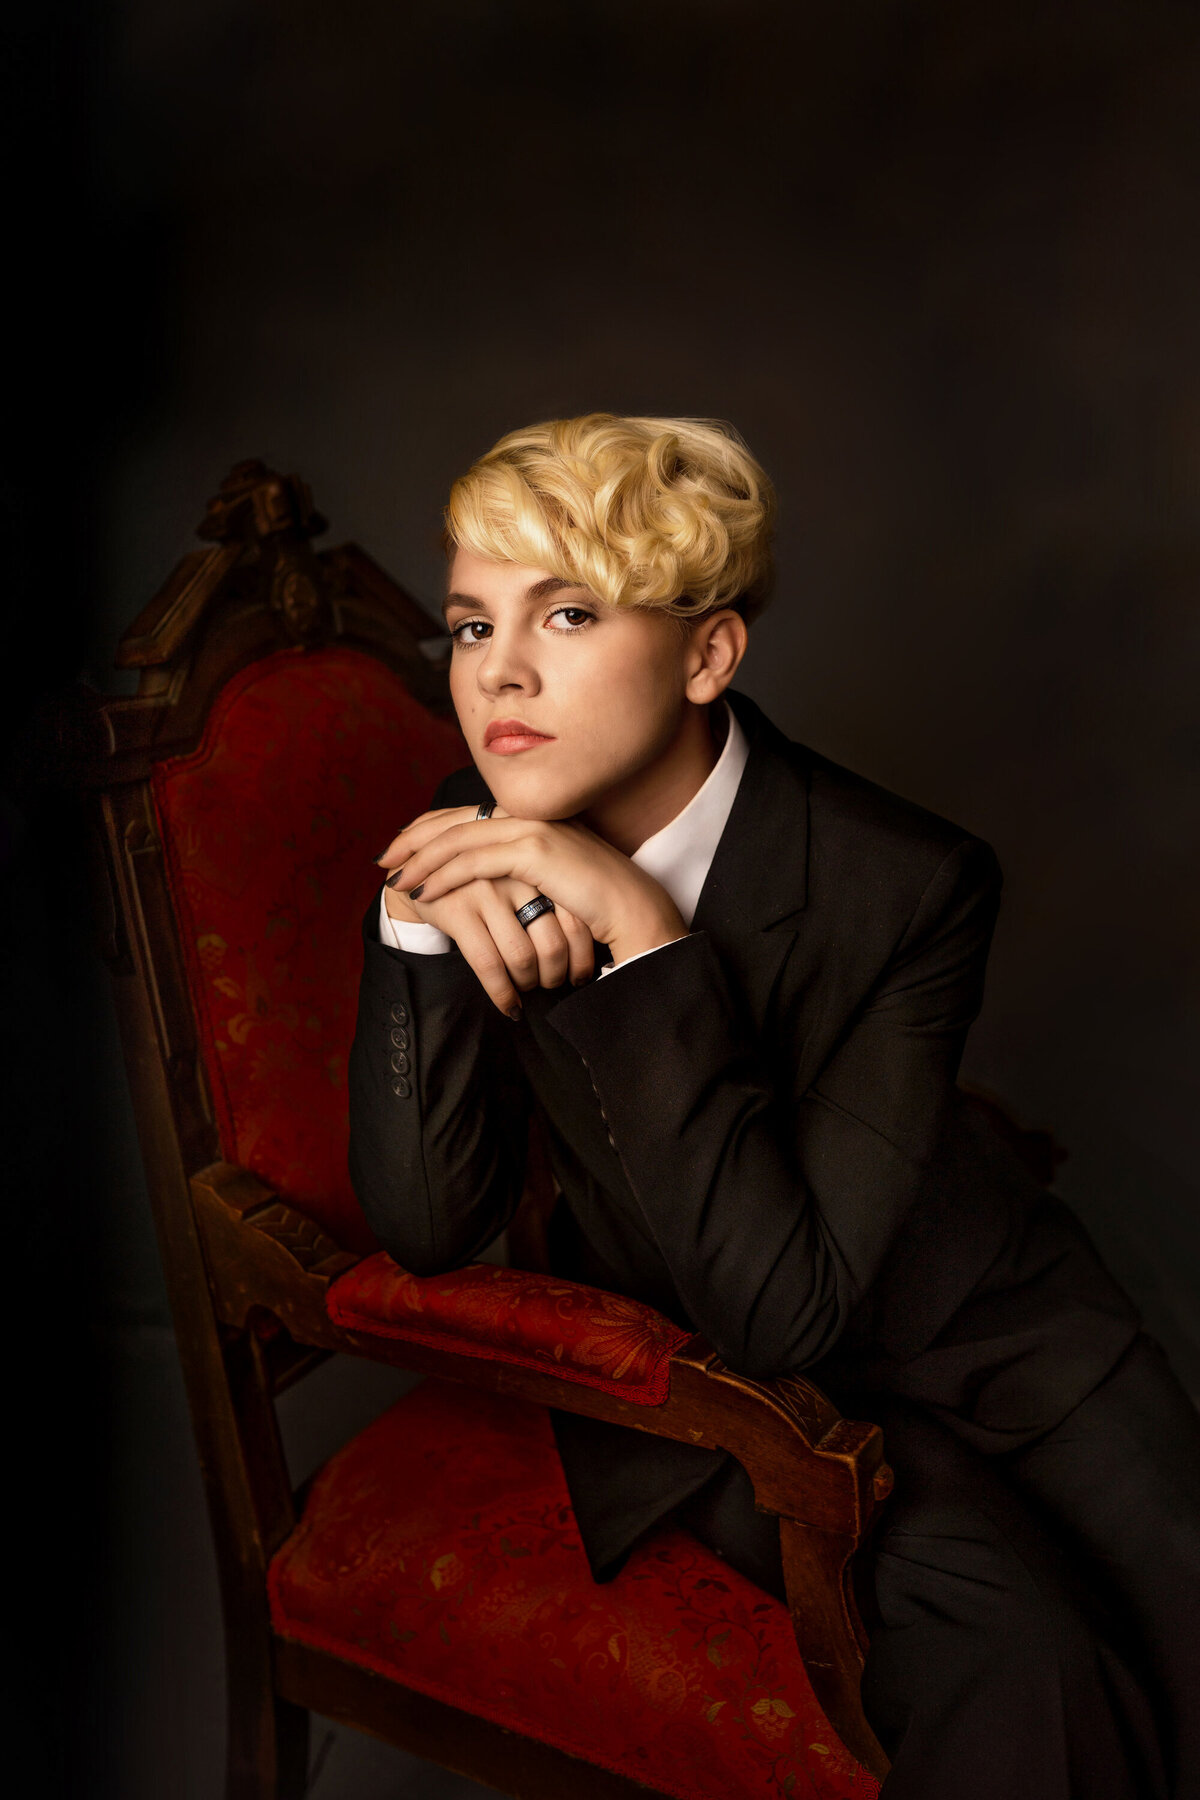 In studio image of female high school studio with pixie cut blonde hair.  She is wearing a black suit and sitting on a Victorian style wood chair with red upholstery.  Her hands are crossed  under her chin.  She has a serious expression.